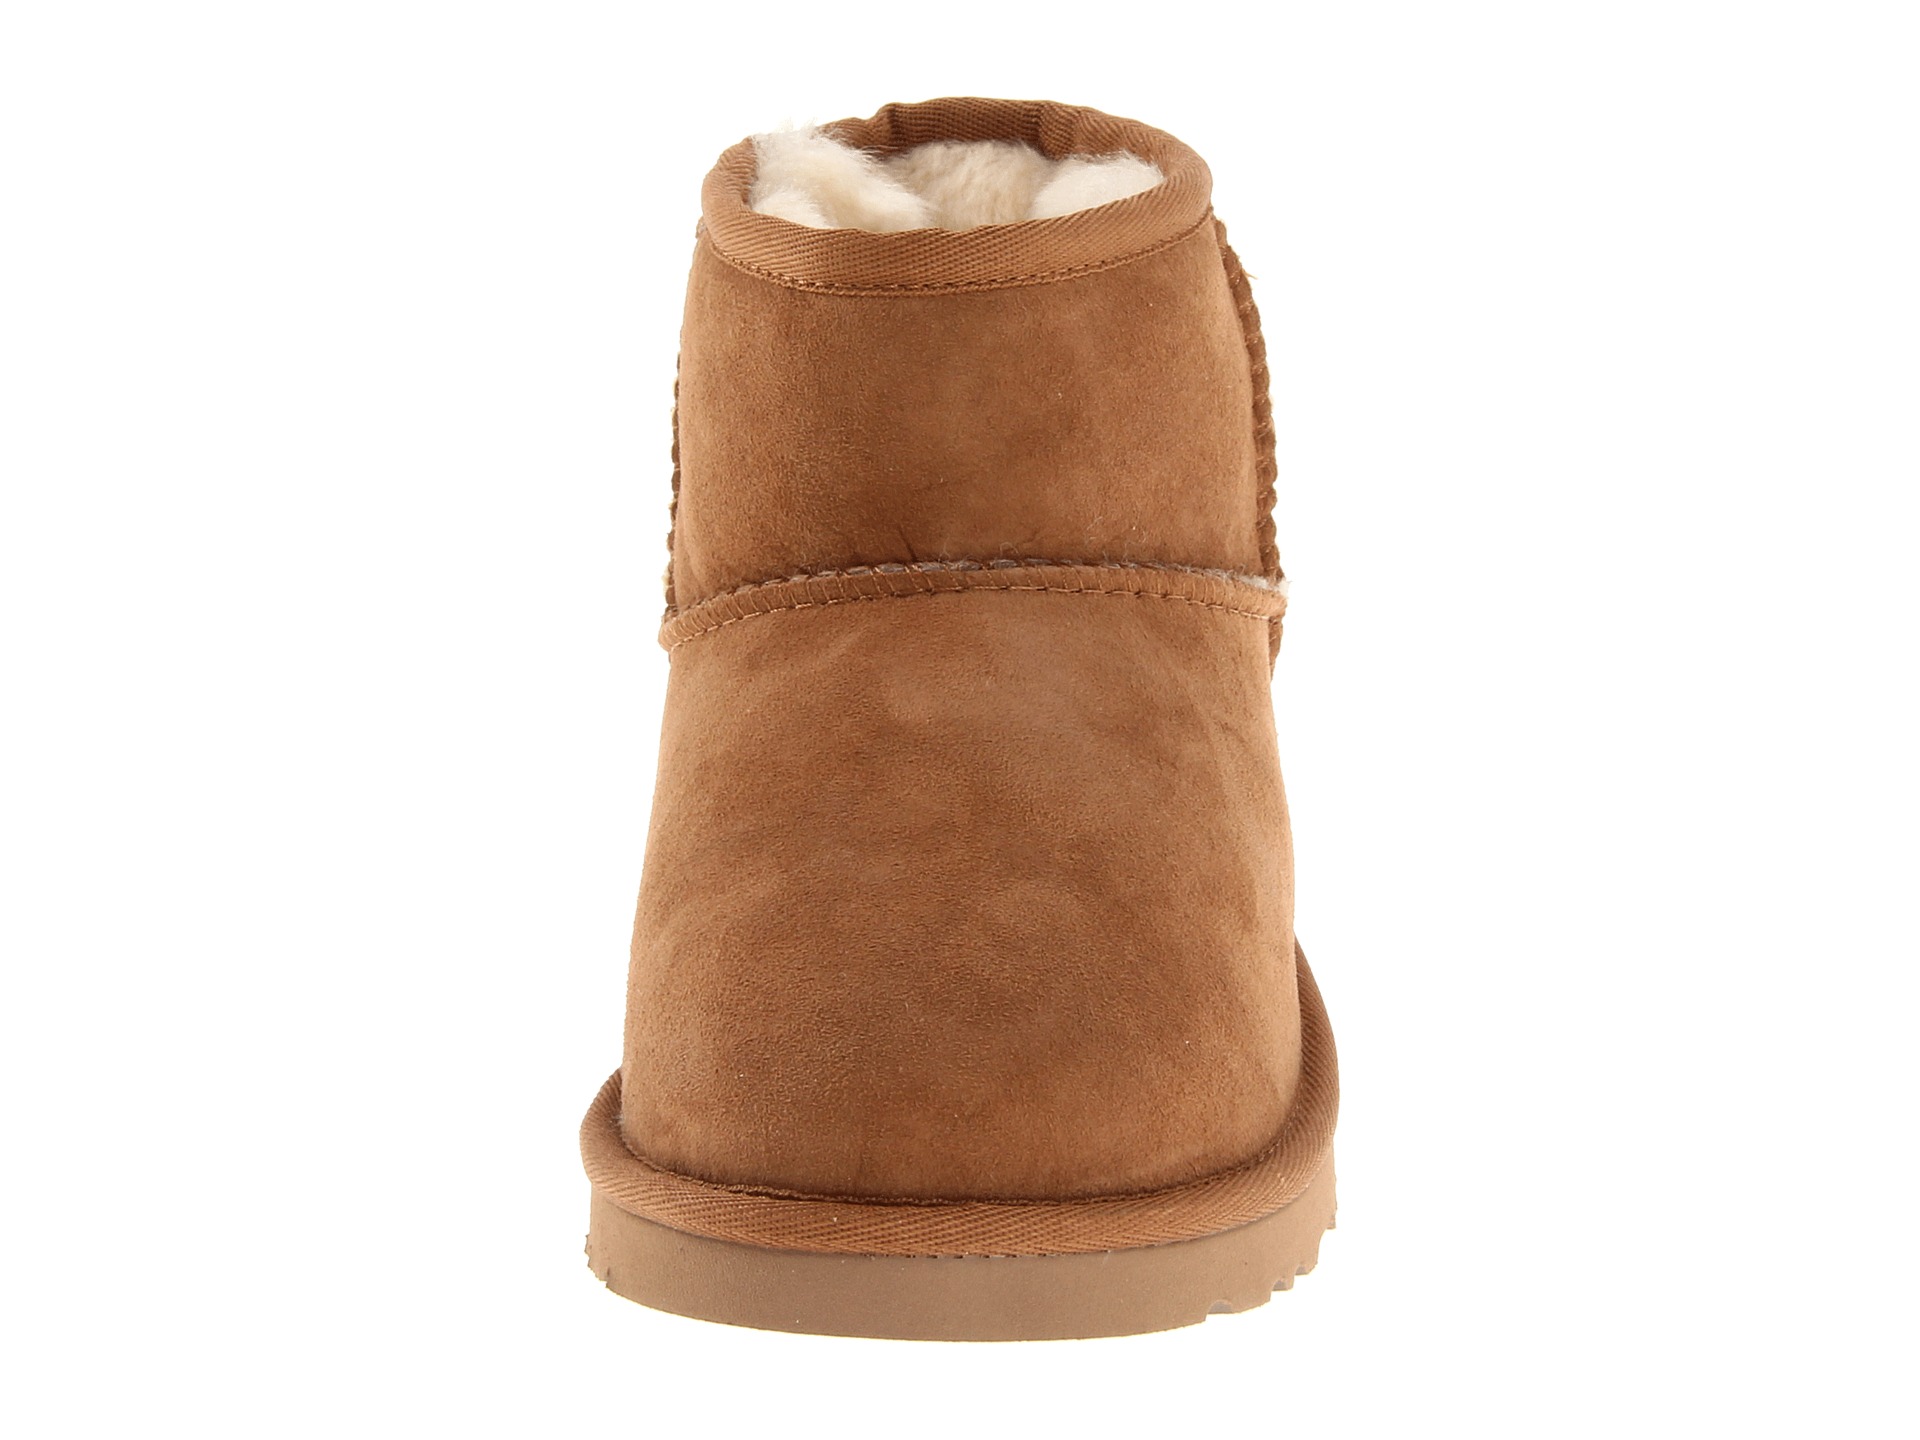 uggs for toddlers size 4